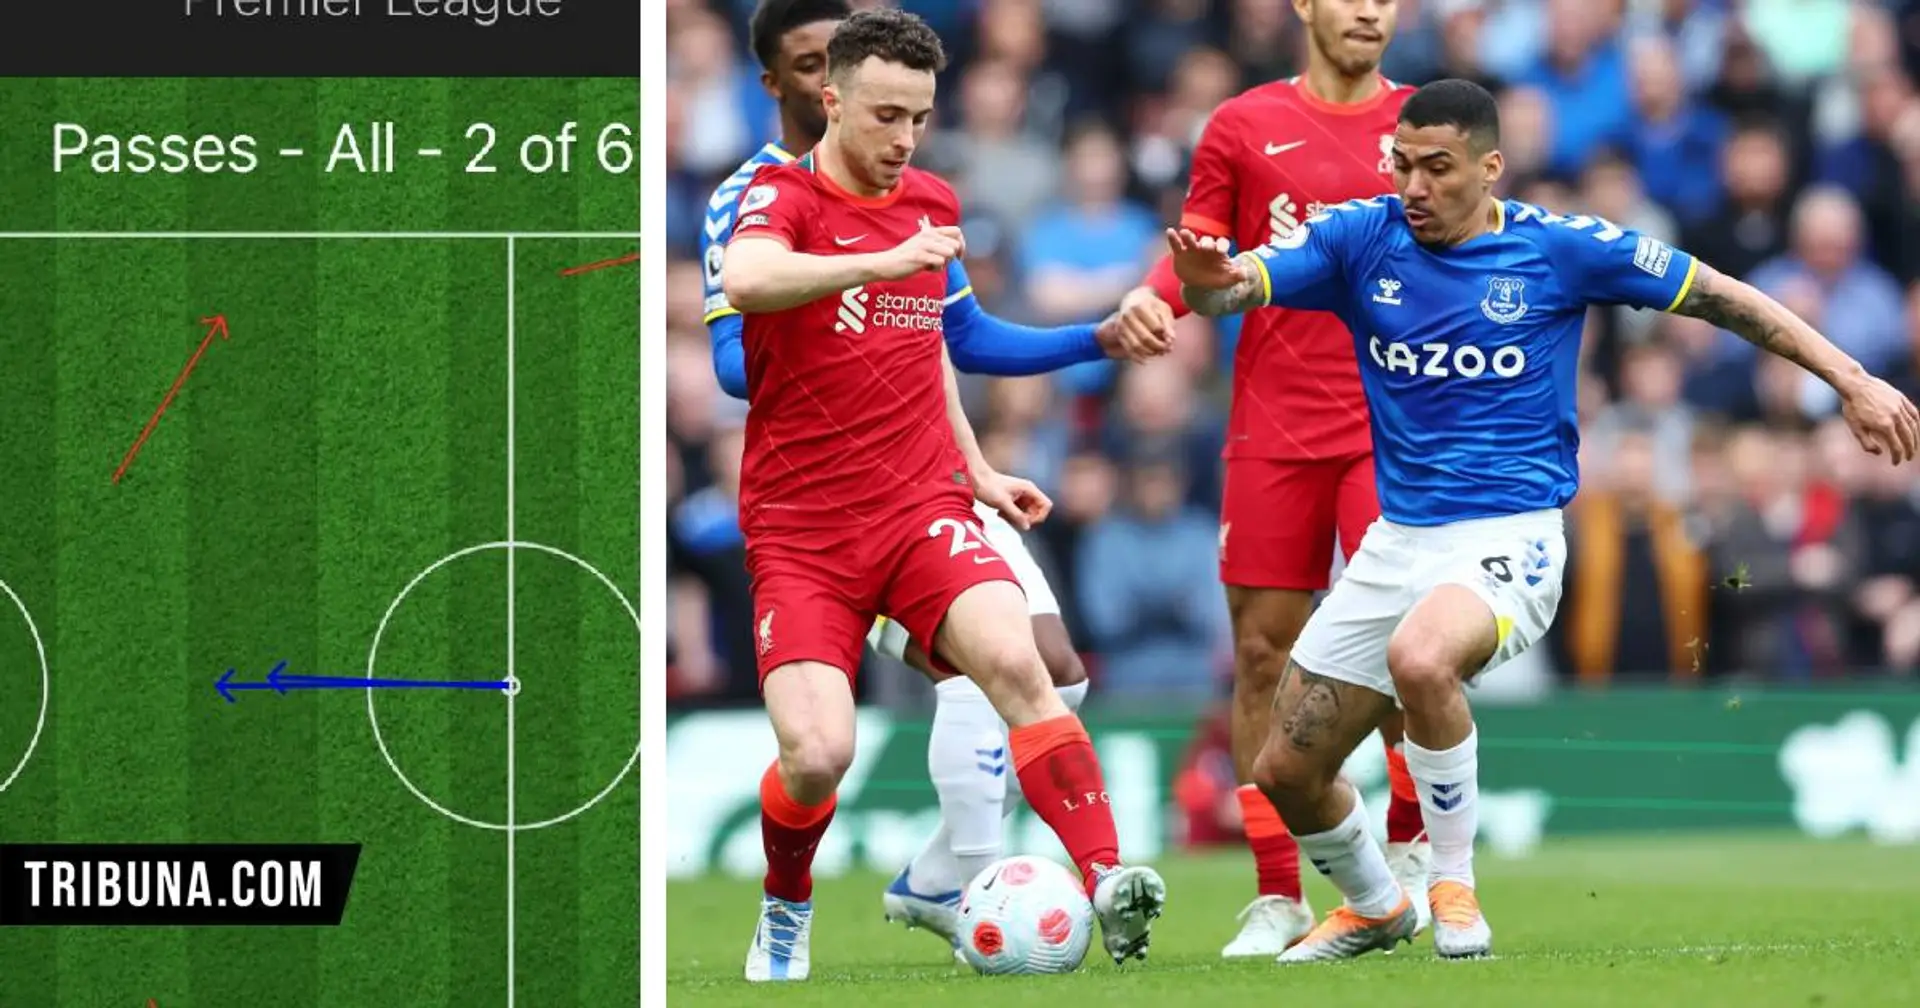 £21m Everton midfielder Allan completed just TWO passes in 73 minutes against Liverpool